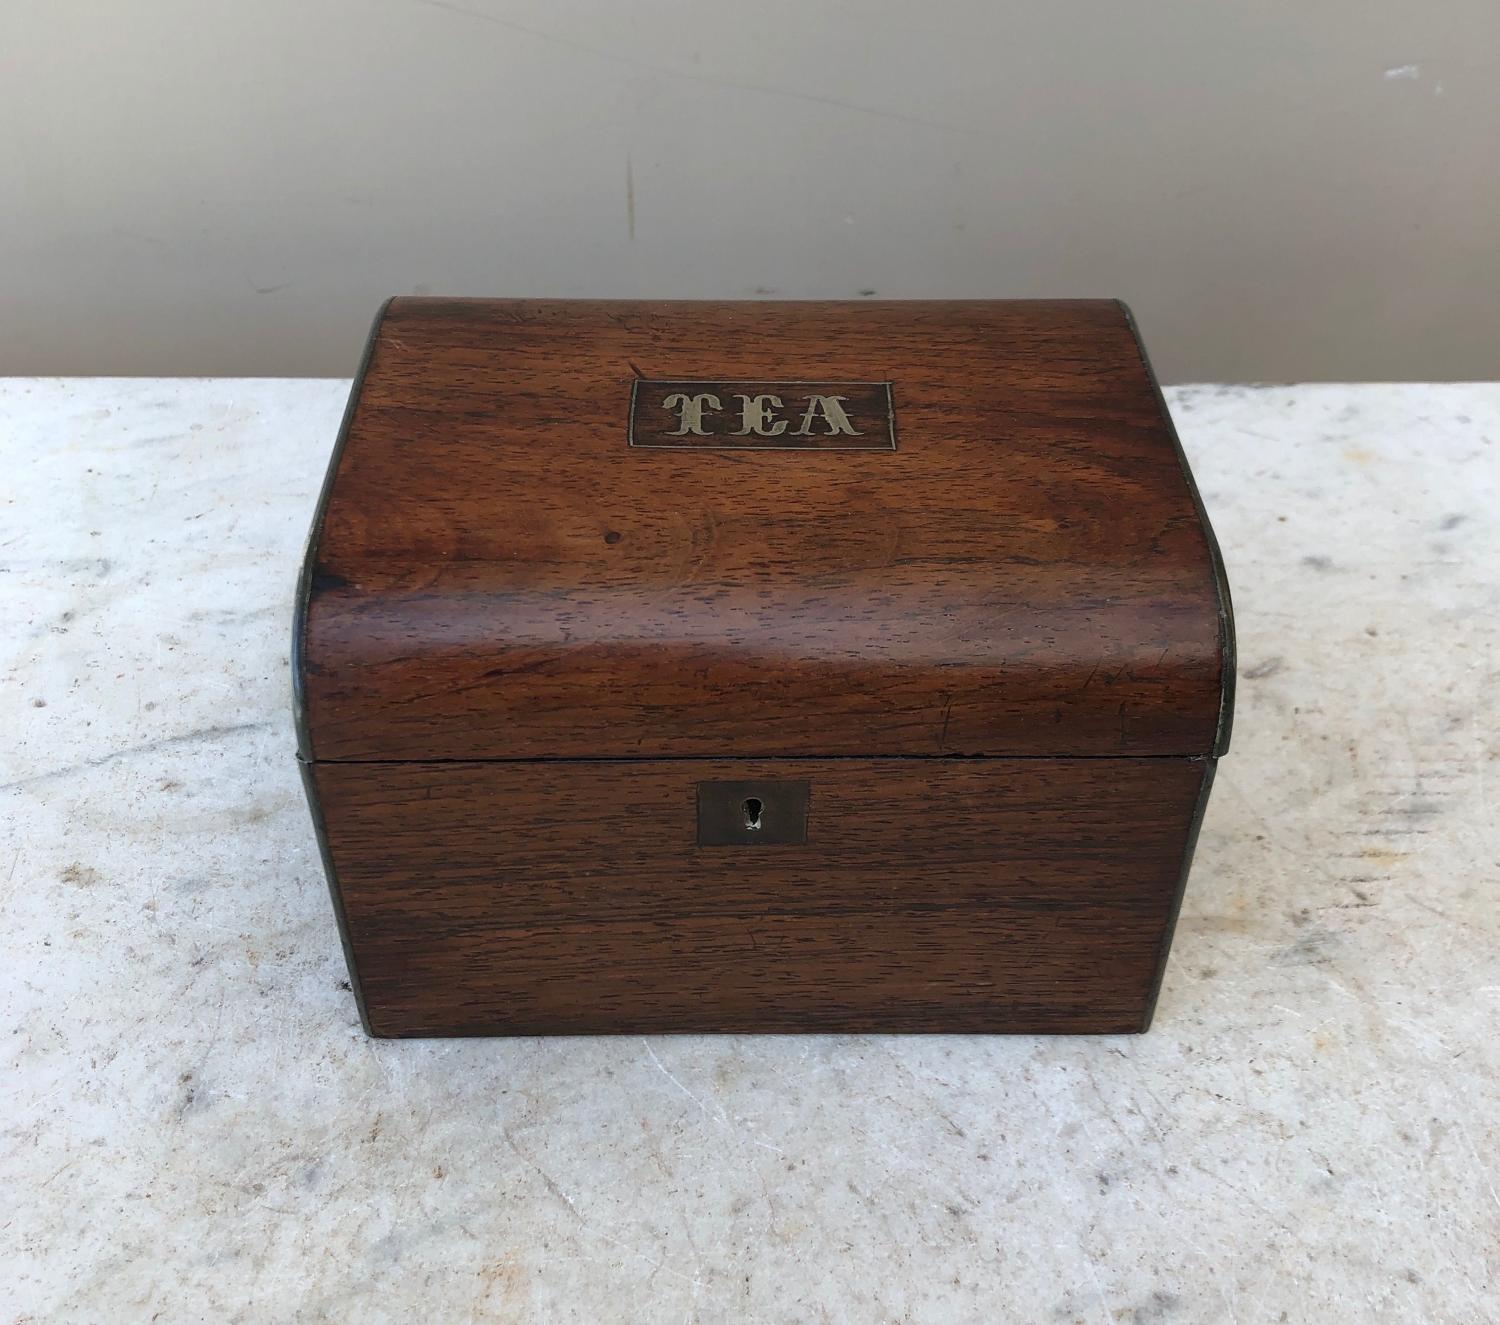 Early 20th Century Tea Caddy - Complete